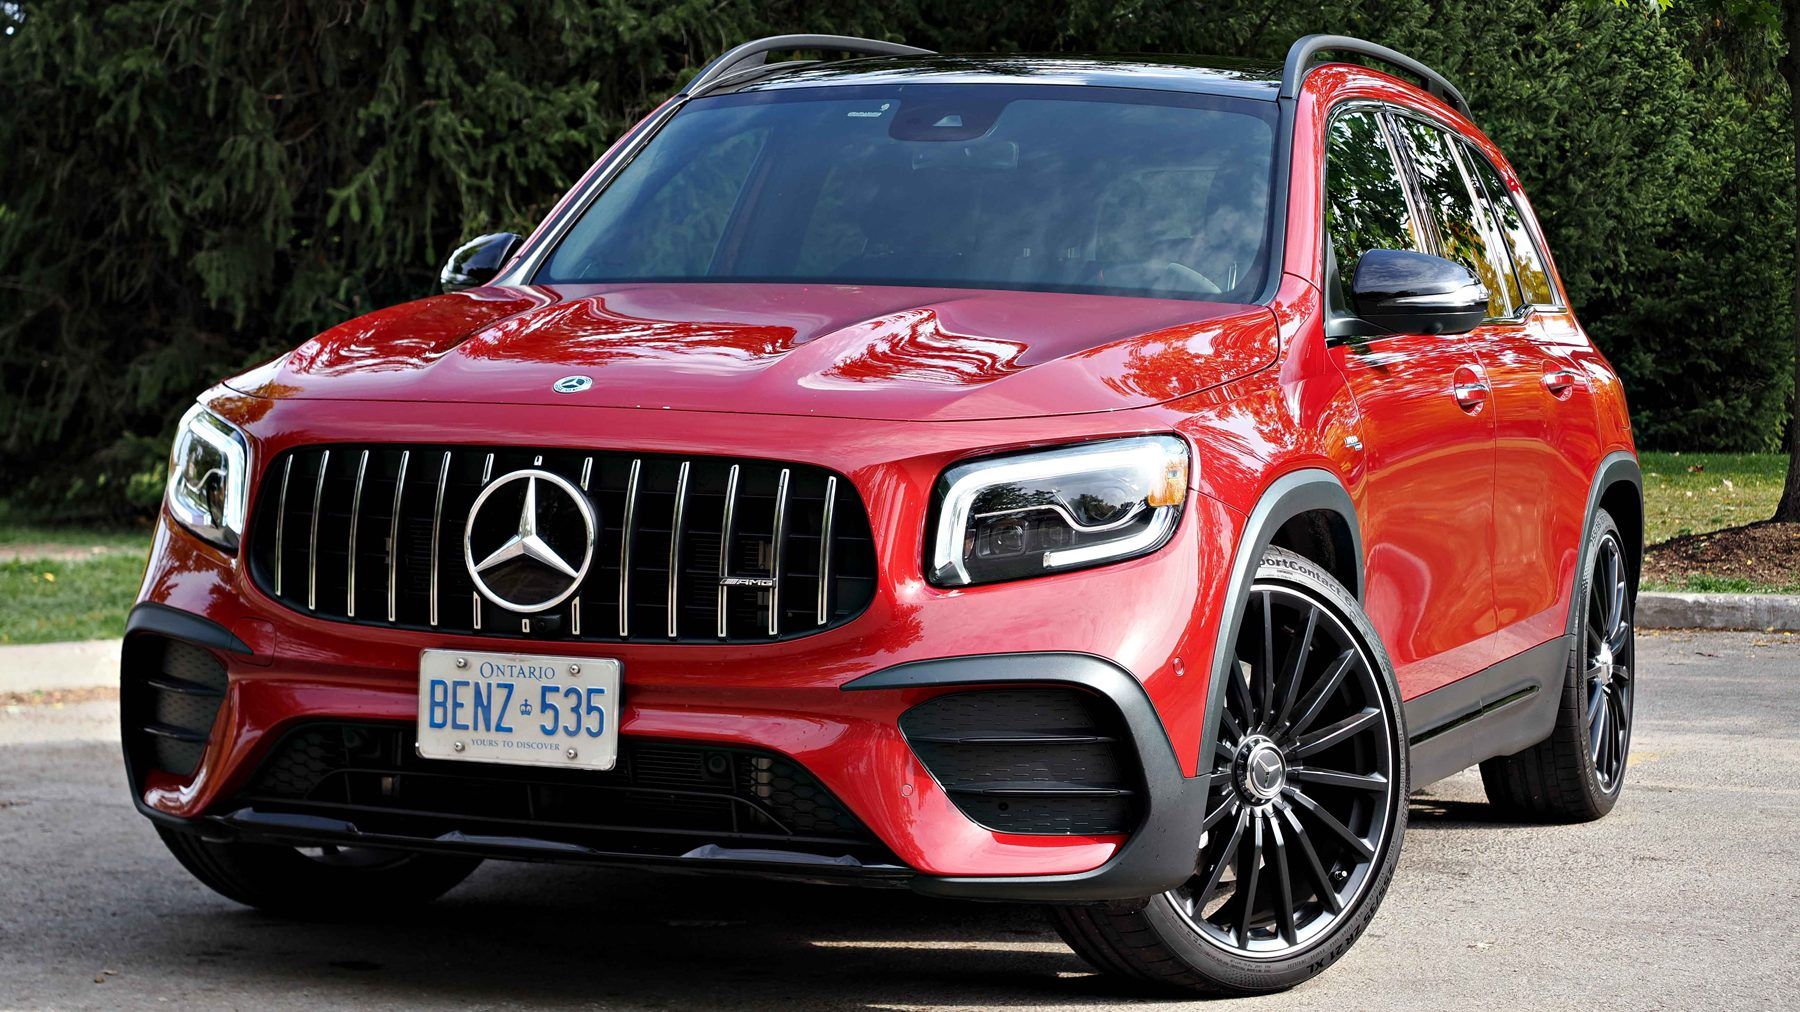 Your Guide To Choosing The Right Mercedez-Benz SUV